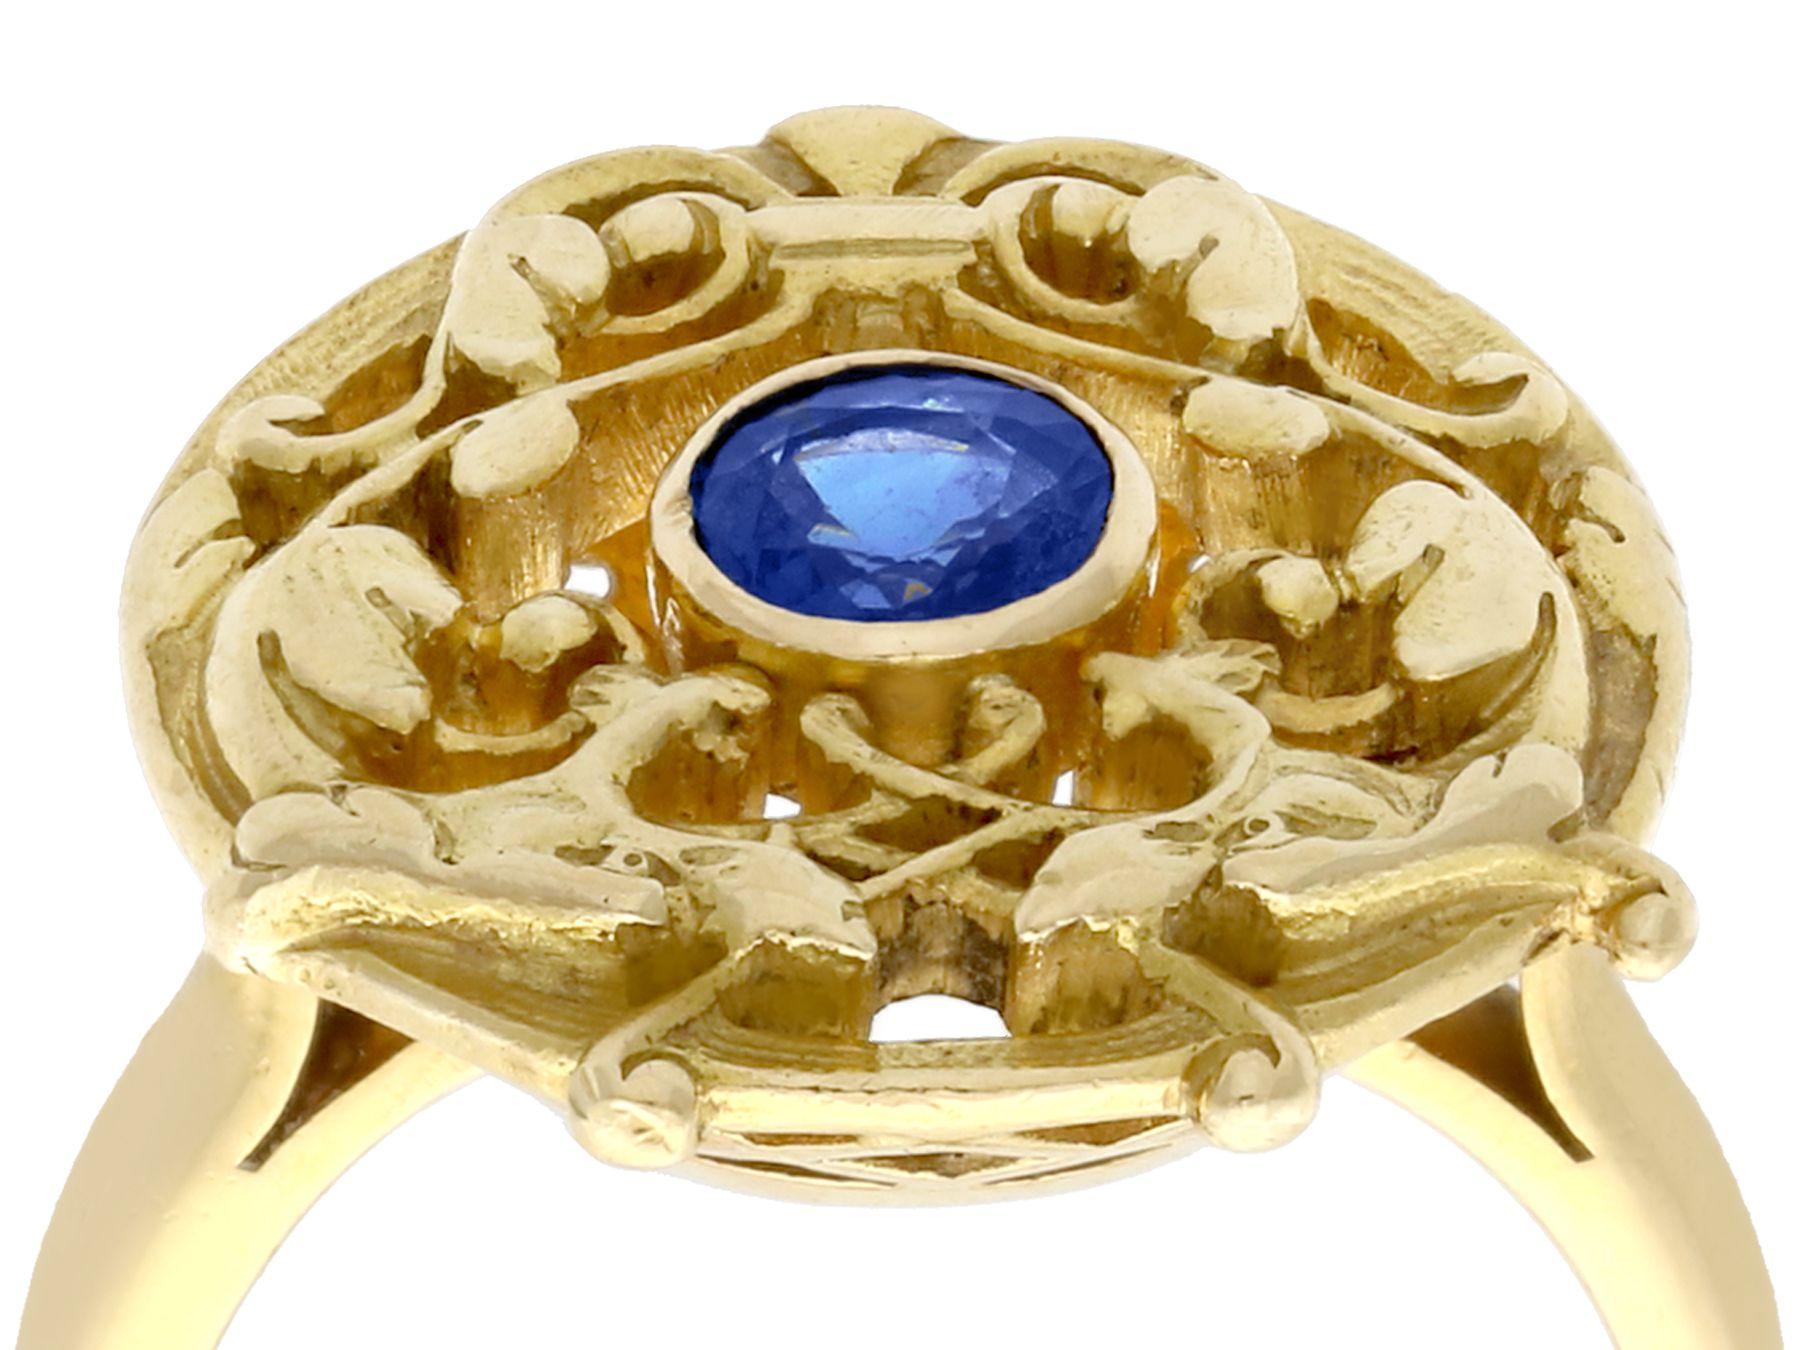 An impressive antique French 0.48 carat blue sapphire and 18 karat yellow gold dress ring; part of our diverse antique jewelry and estate jewelry collections.

This fine and impressive small sapphire ring has been crafted in 18k yellow gold.

The